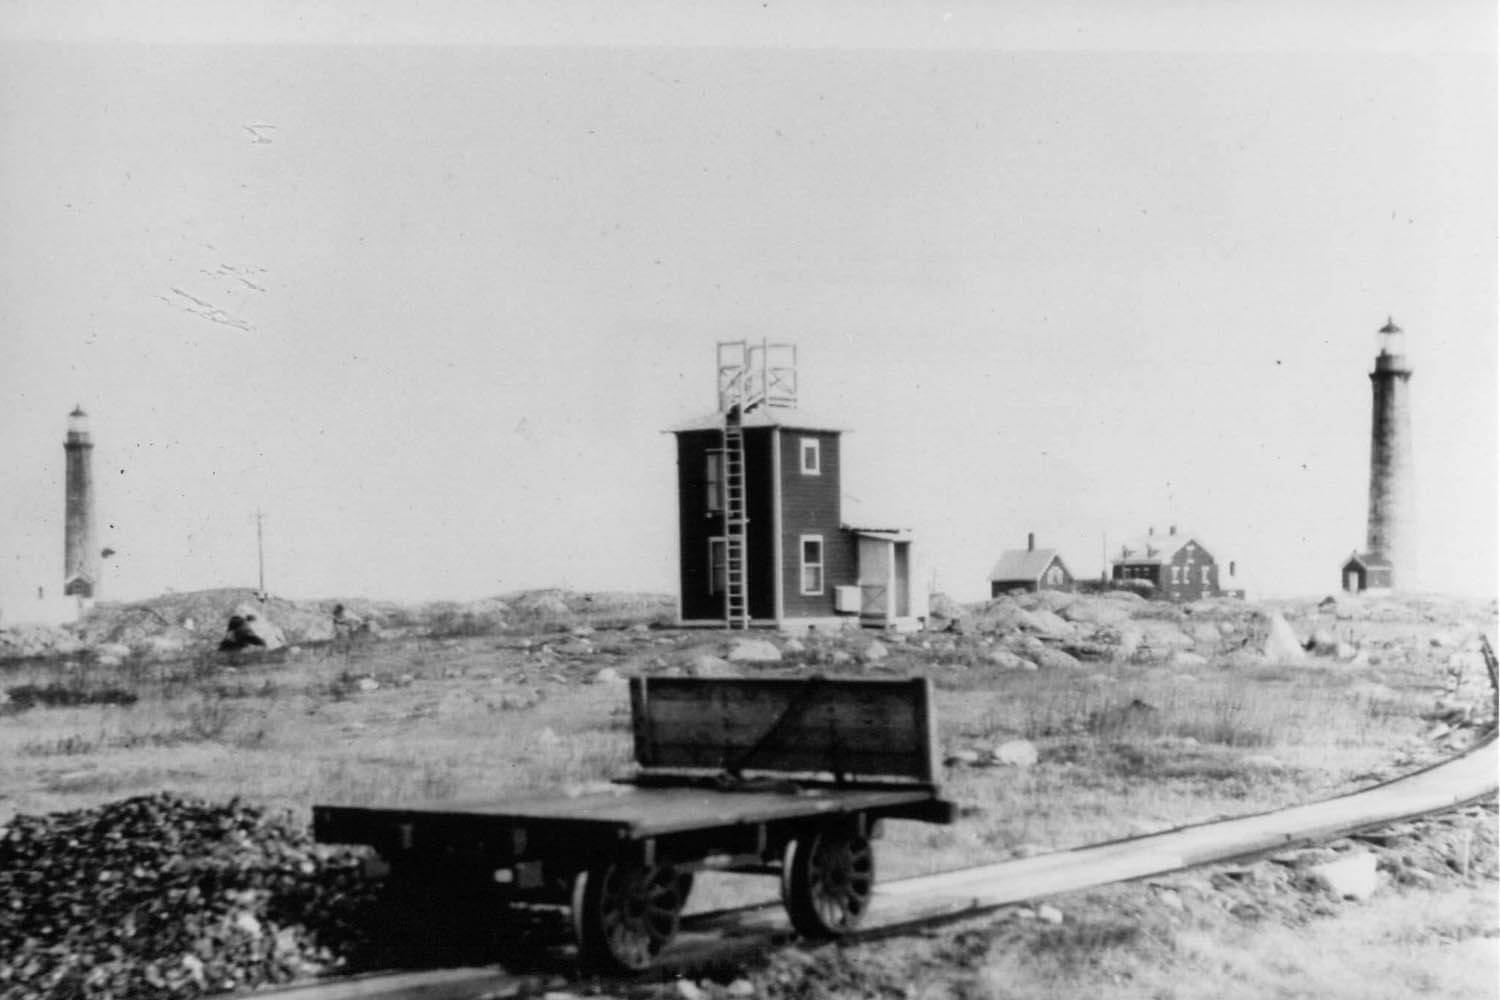 Coal cart near the radio compass tower operated by the U.S. Navy c.1911.